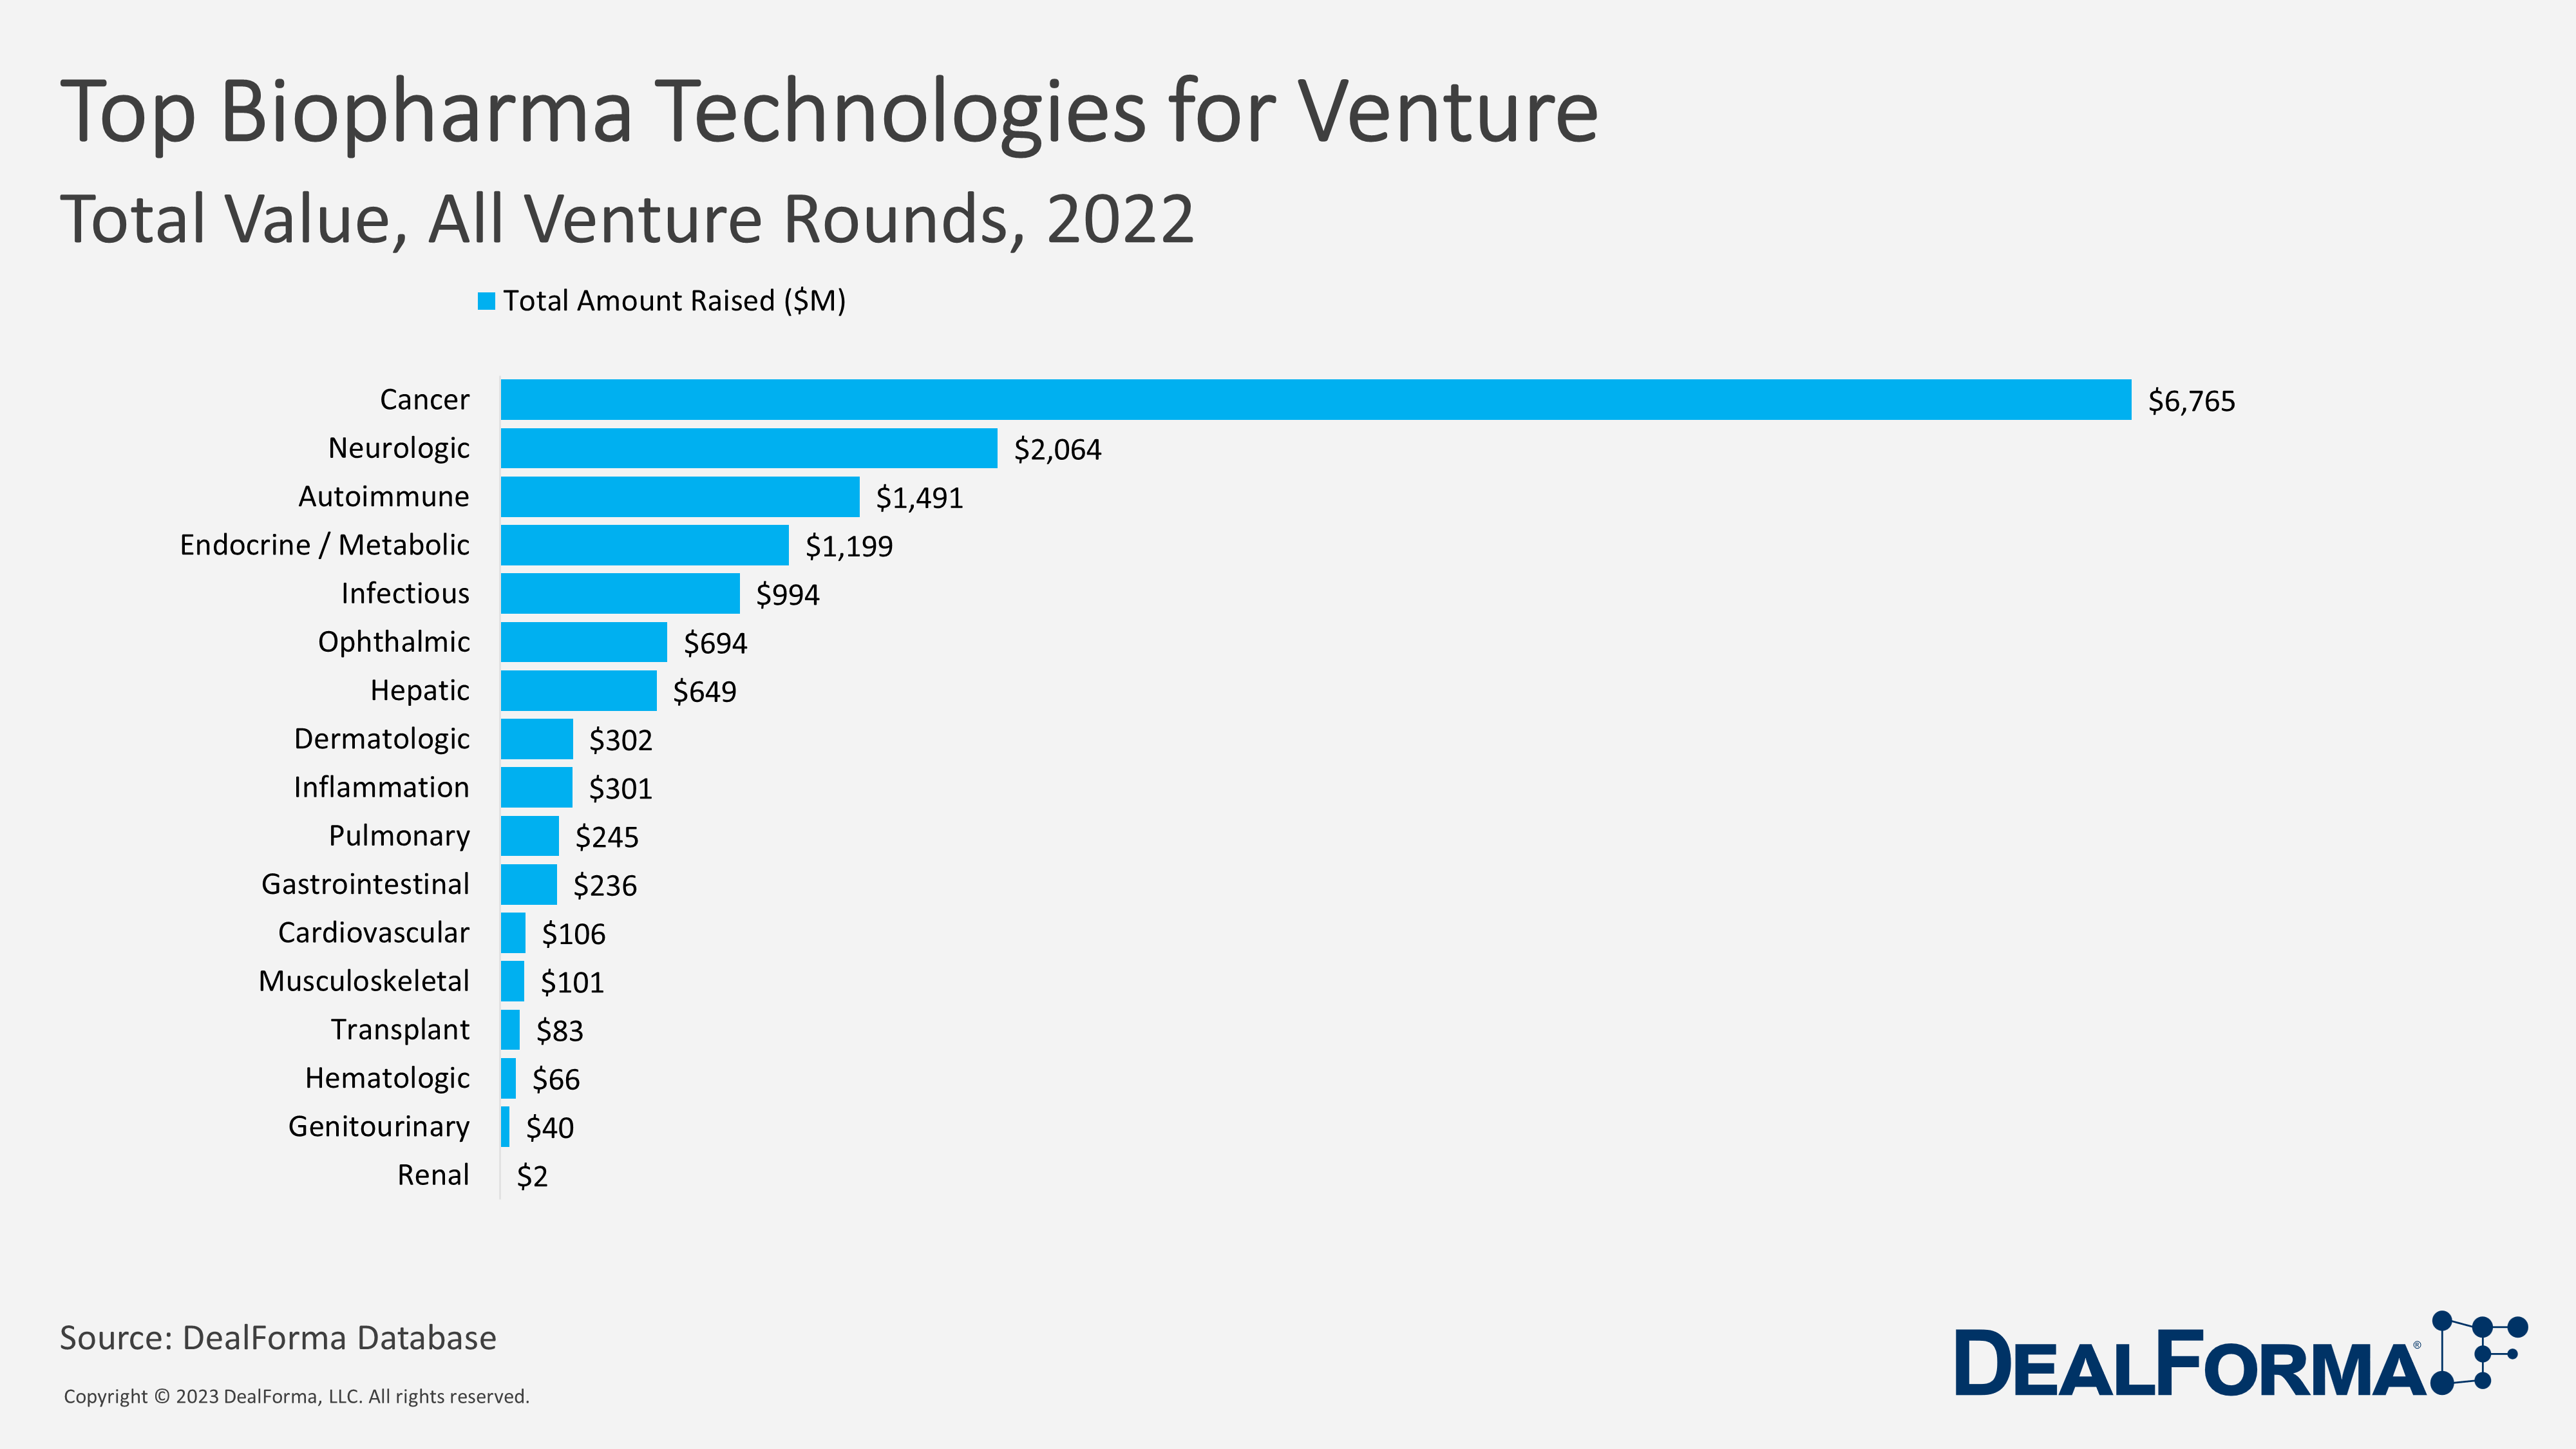 Top Biopharma Technologies for Venture. Total Value, All Venture Rounds 2022